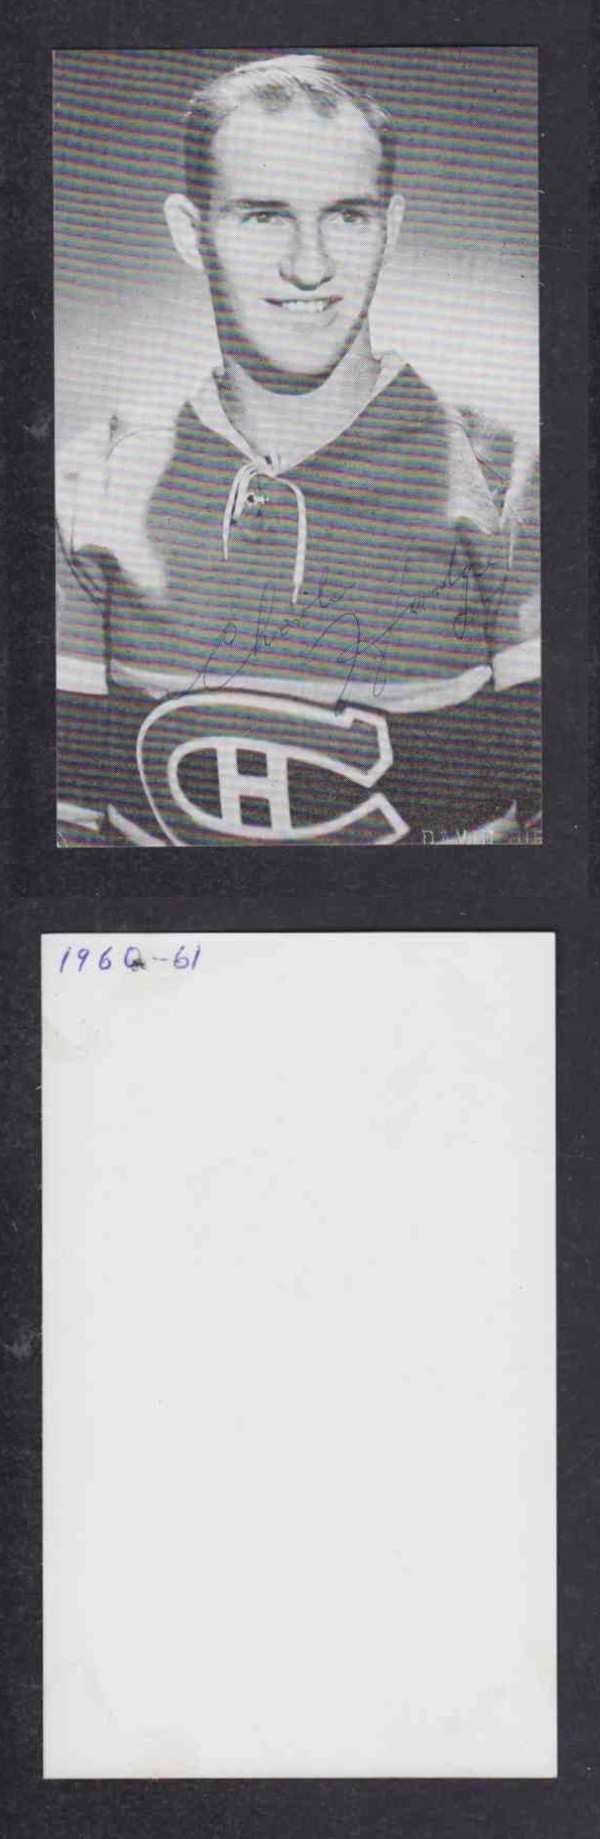 1960 'S MONTREAL CANADIENS C.HODGE  AUTOGRAPHED POST CARD  photo